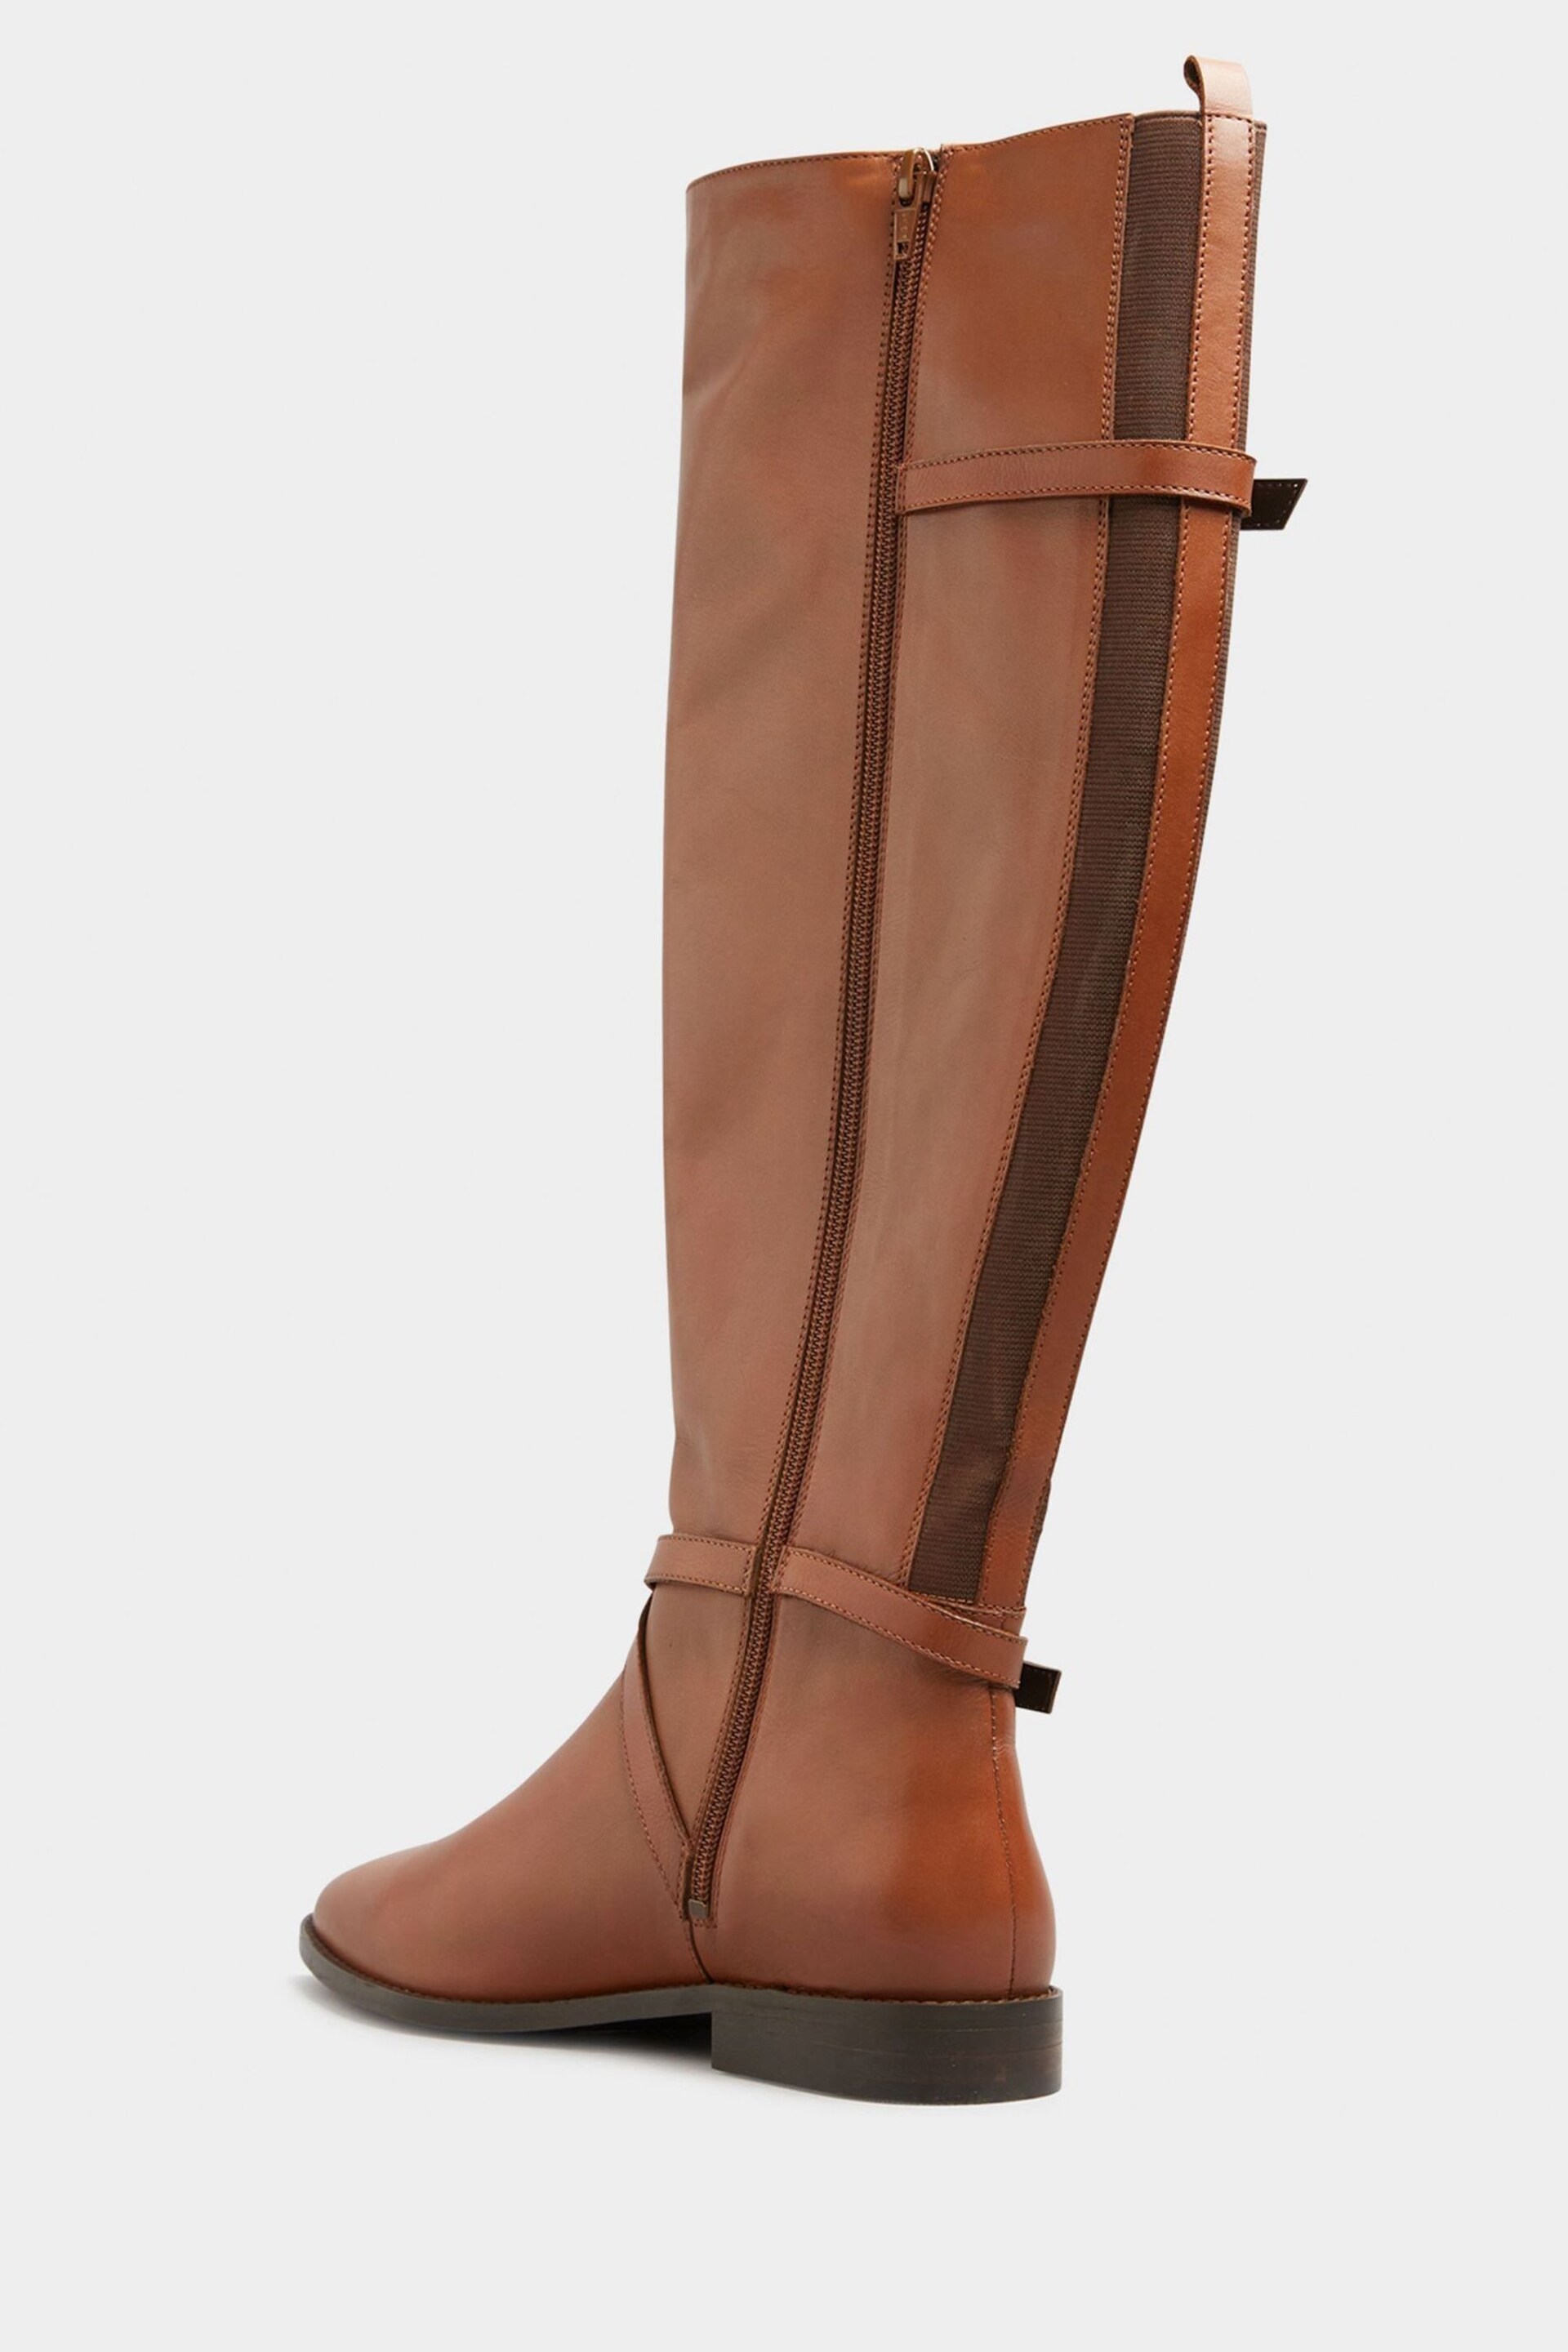 Long Tall Sally Brown Leather Riding Boots - Image 3 of 5